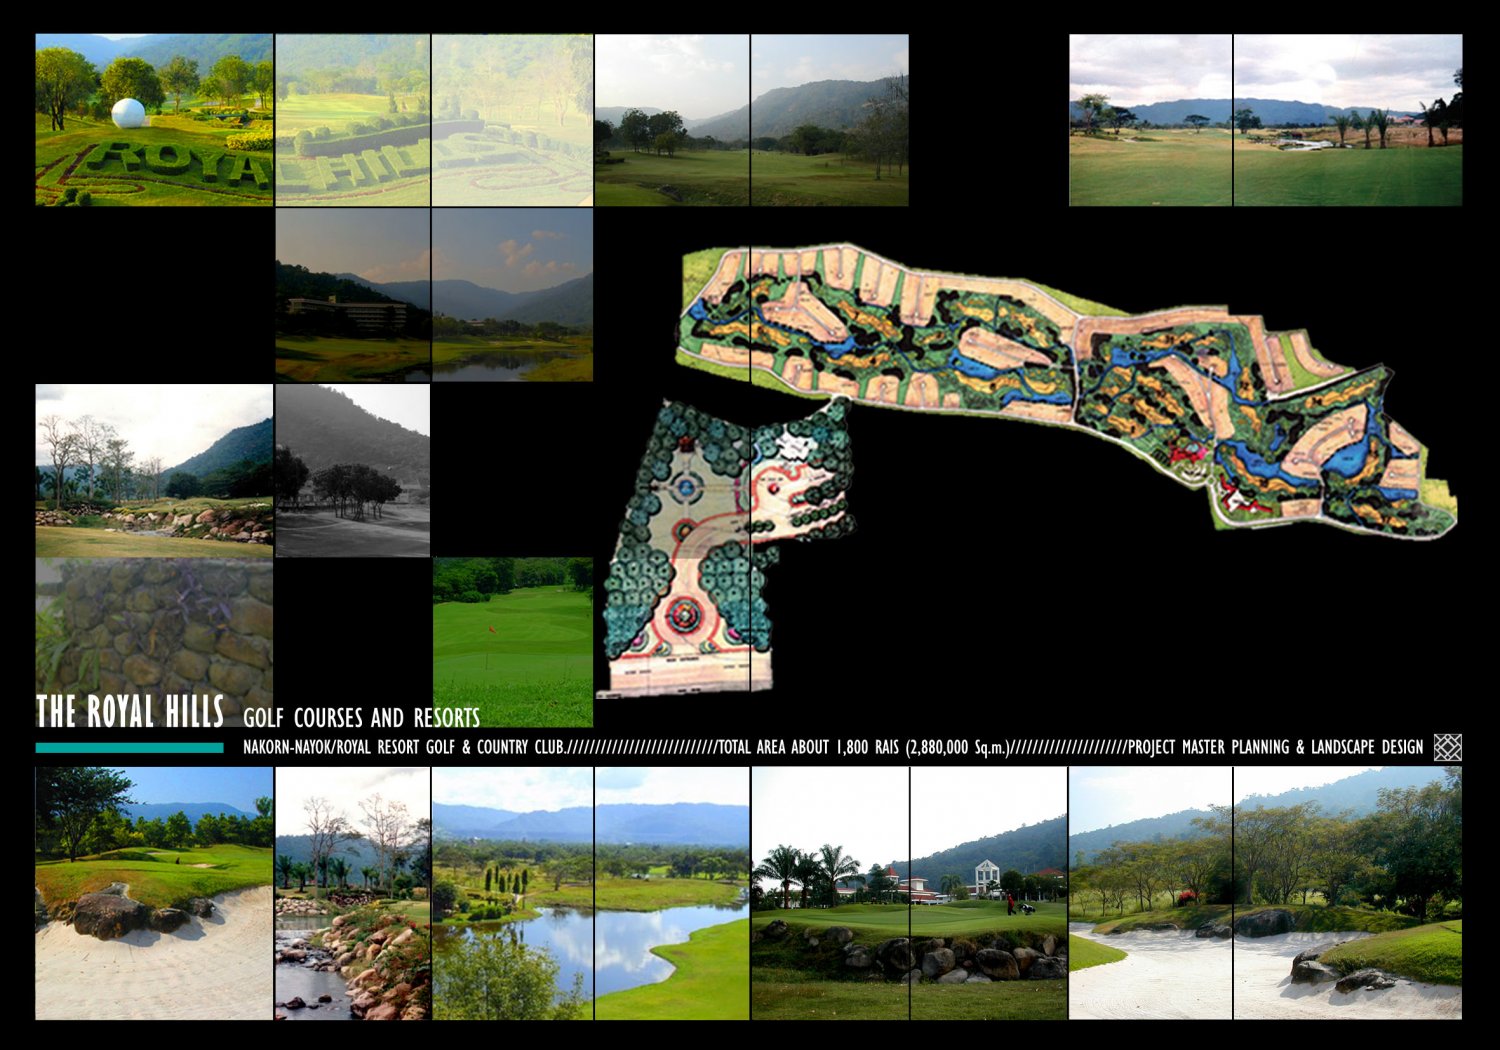 The Royal Hills Golf Courses & Resorts